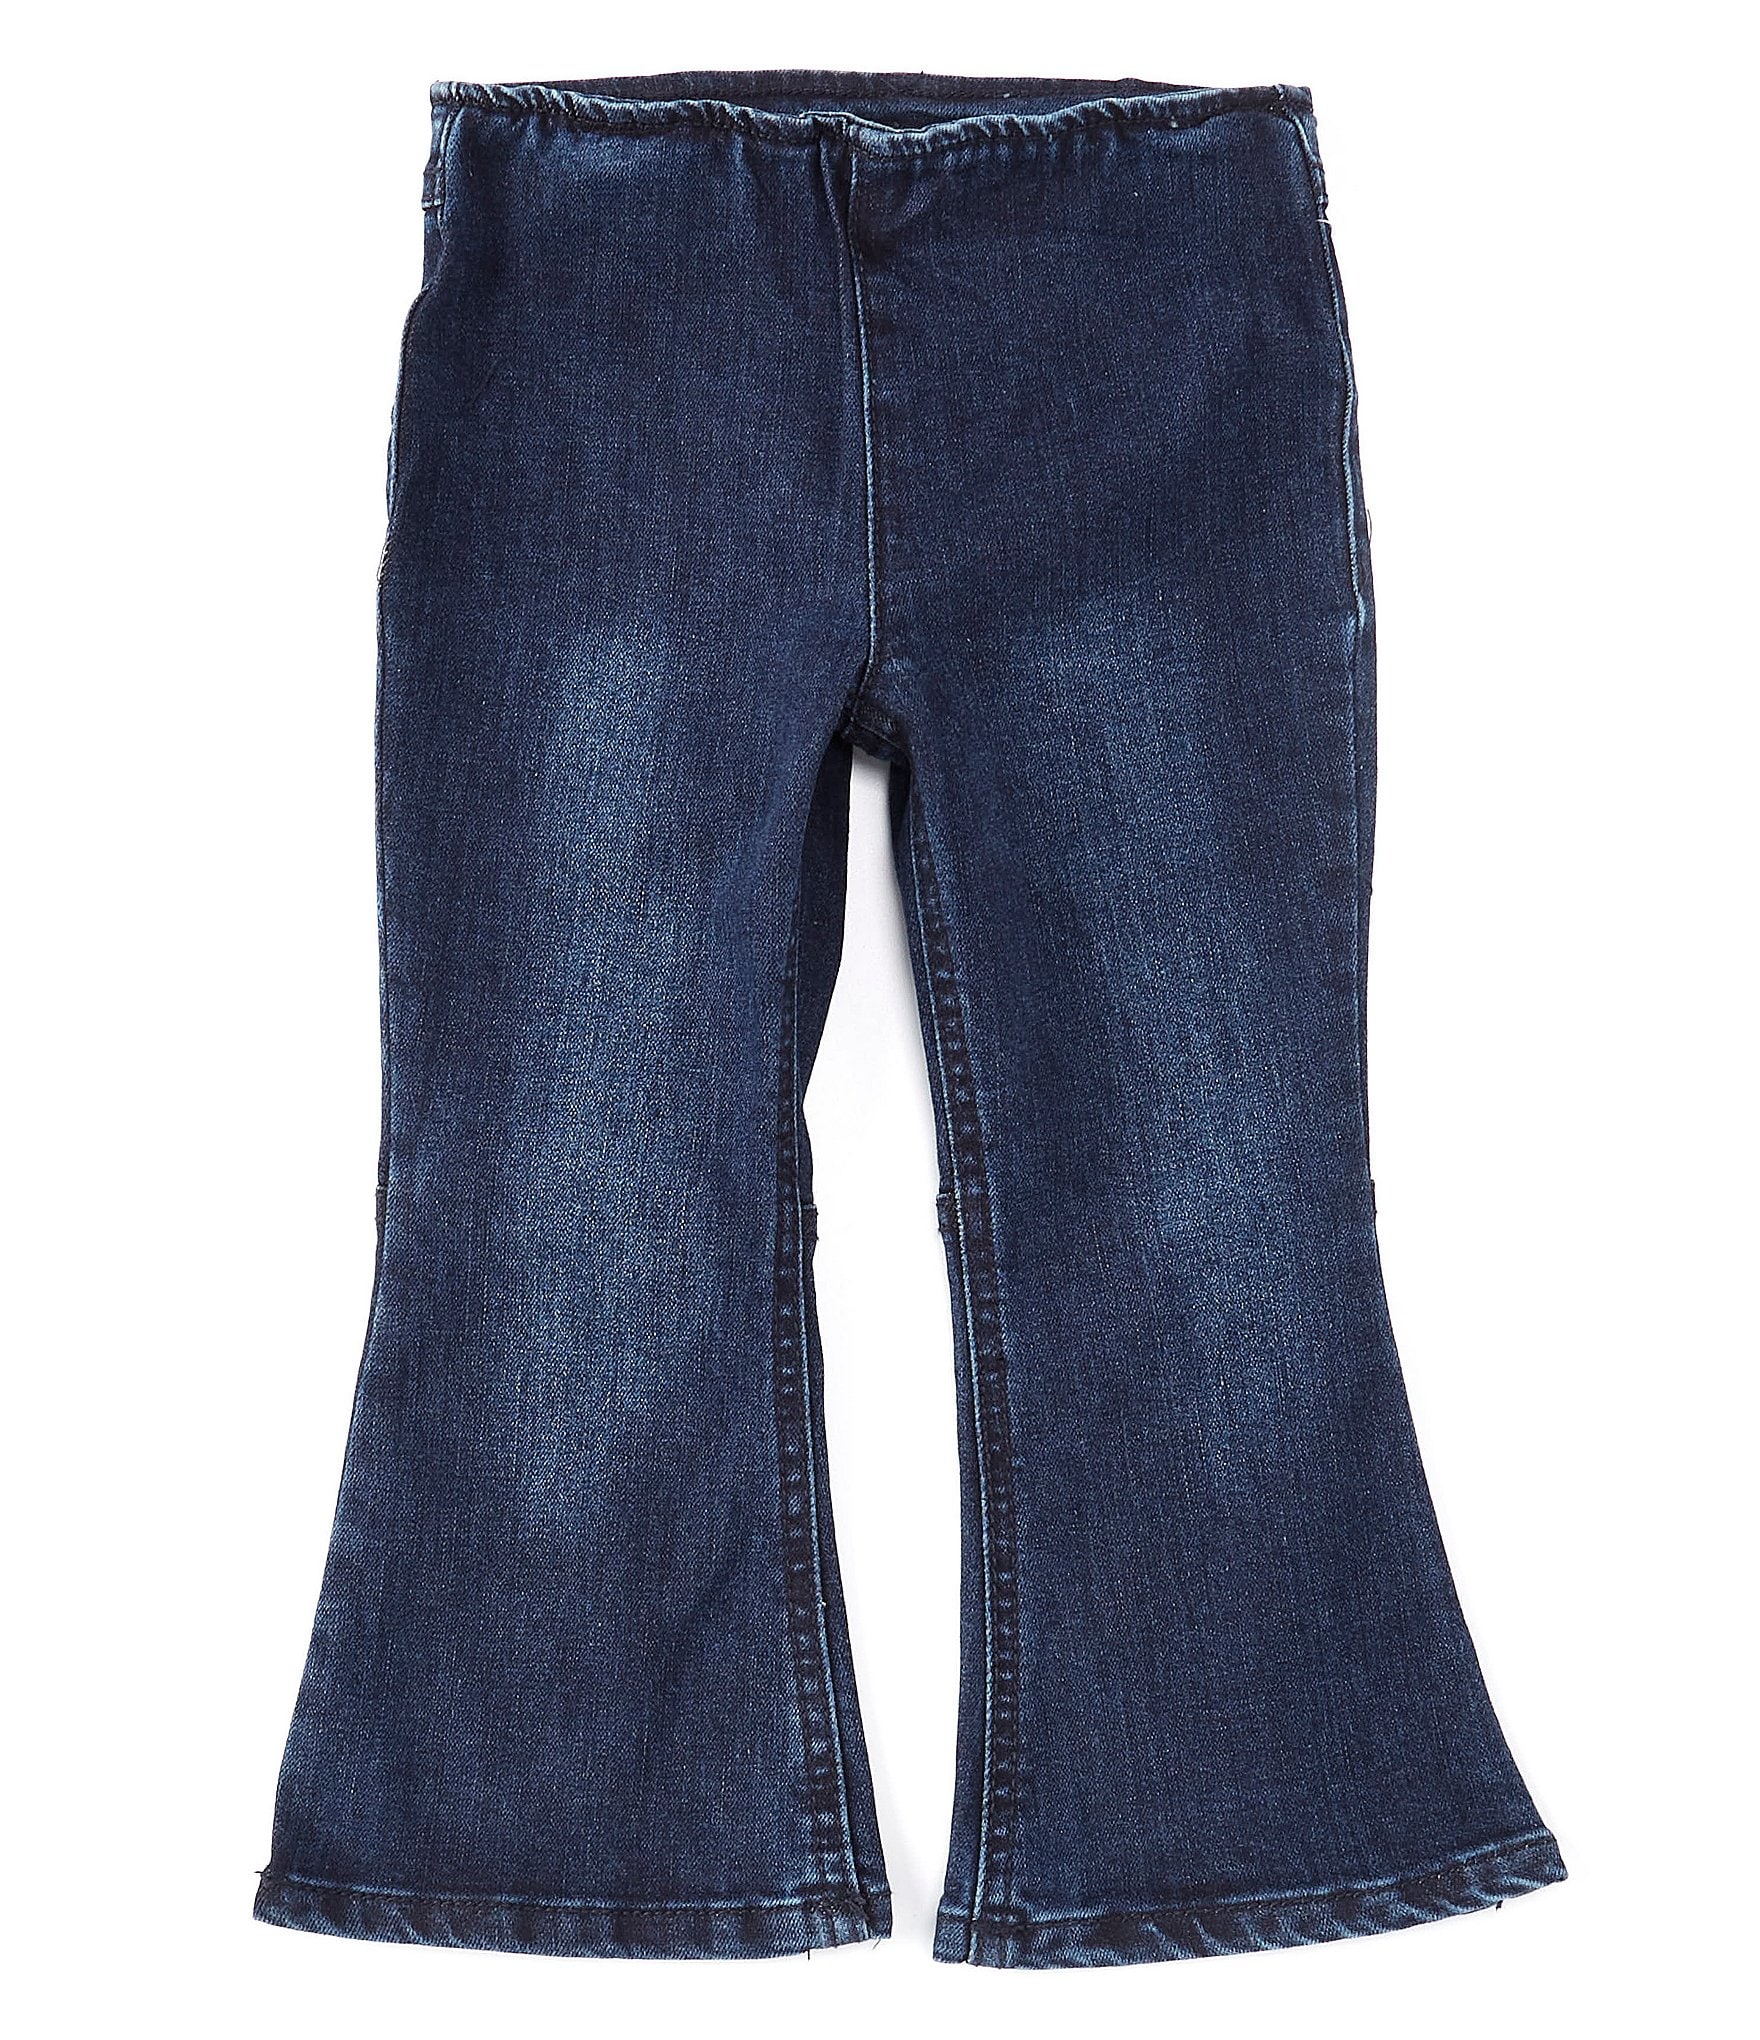 Pin by Claudia on Bordados | Baby girl jeans, Pants for women, Jeans kids